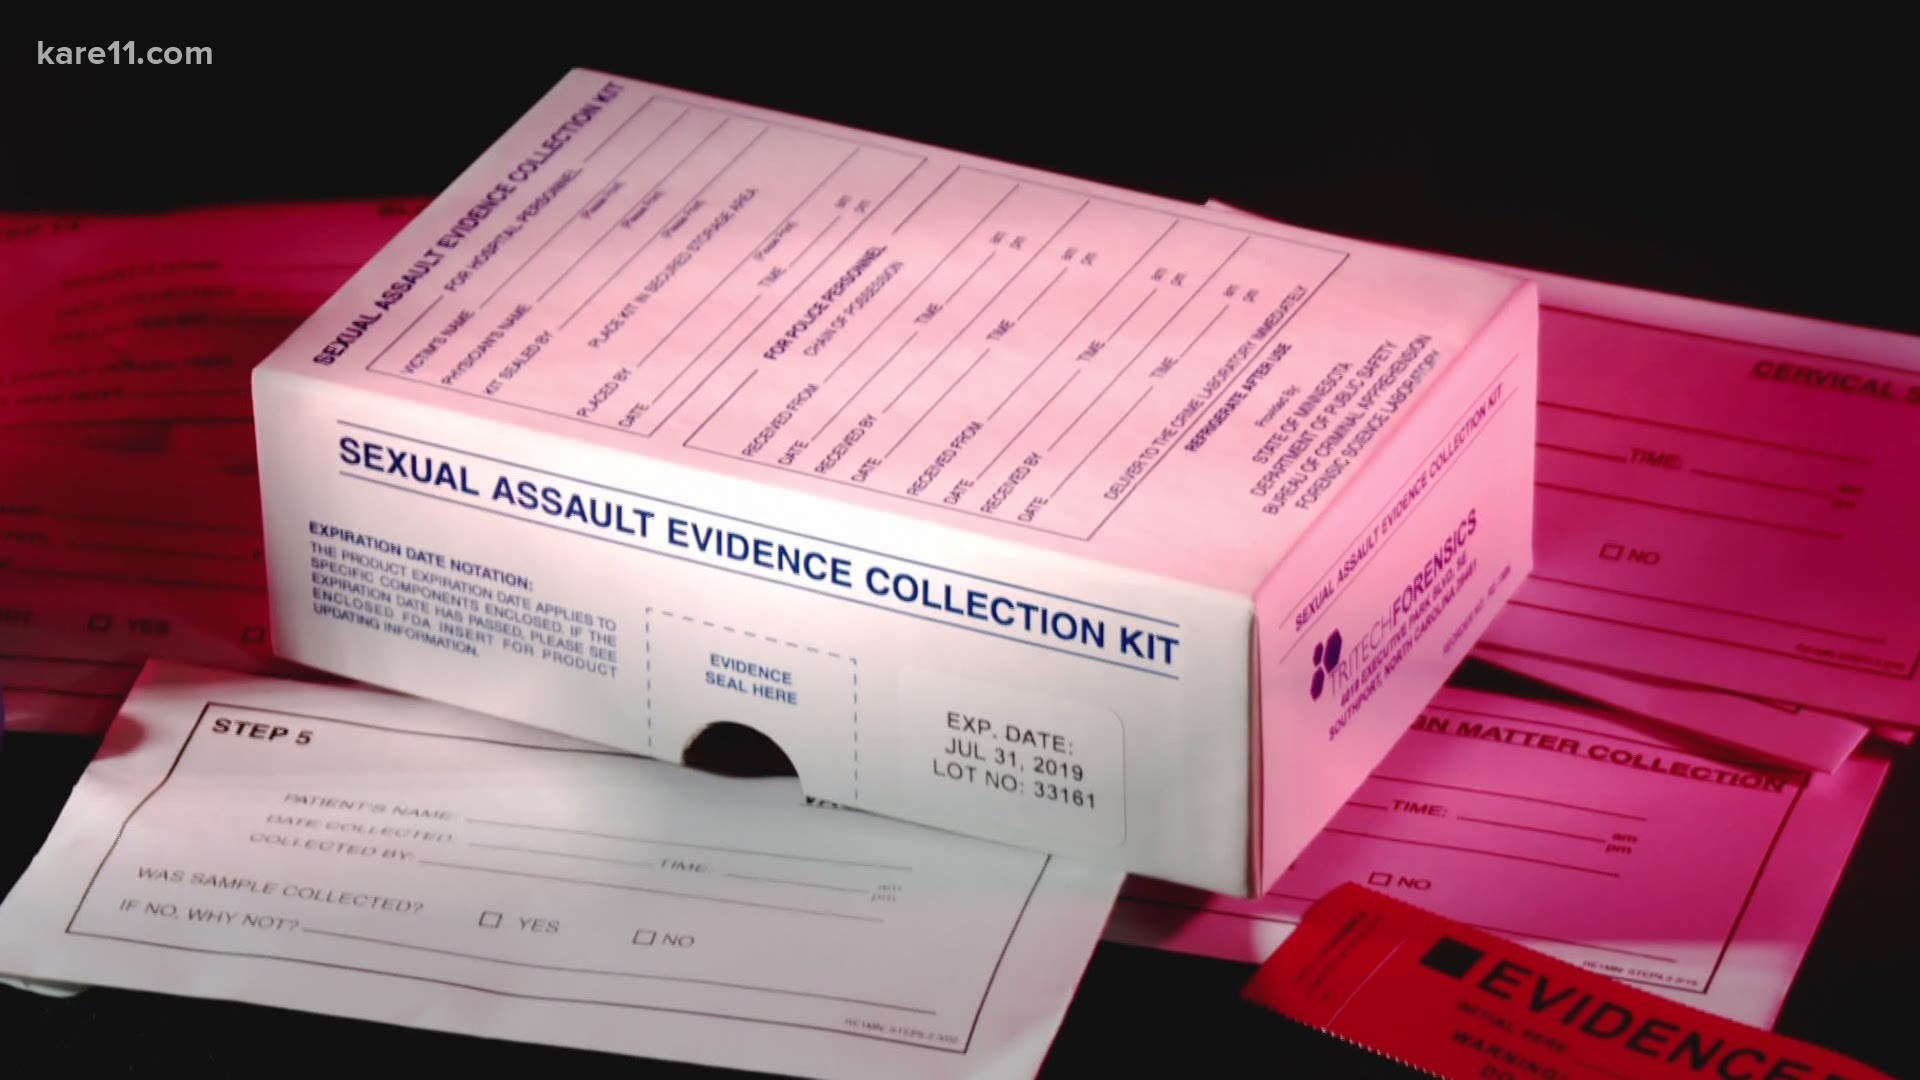 After a year-long KARE 11 investigation, rape kits no longer allowed to be destroyed and all kits in cases reported to police must be tested and tracked.